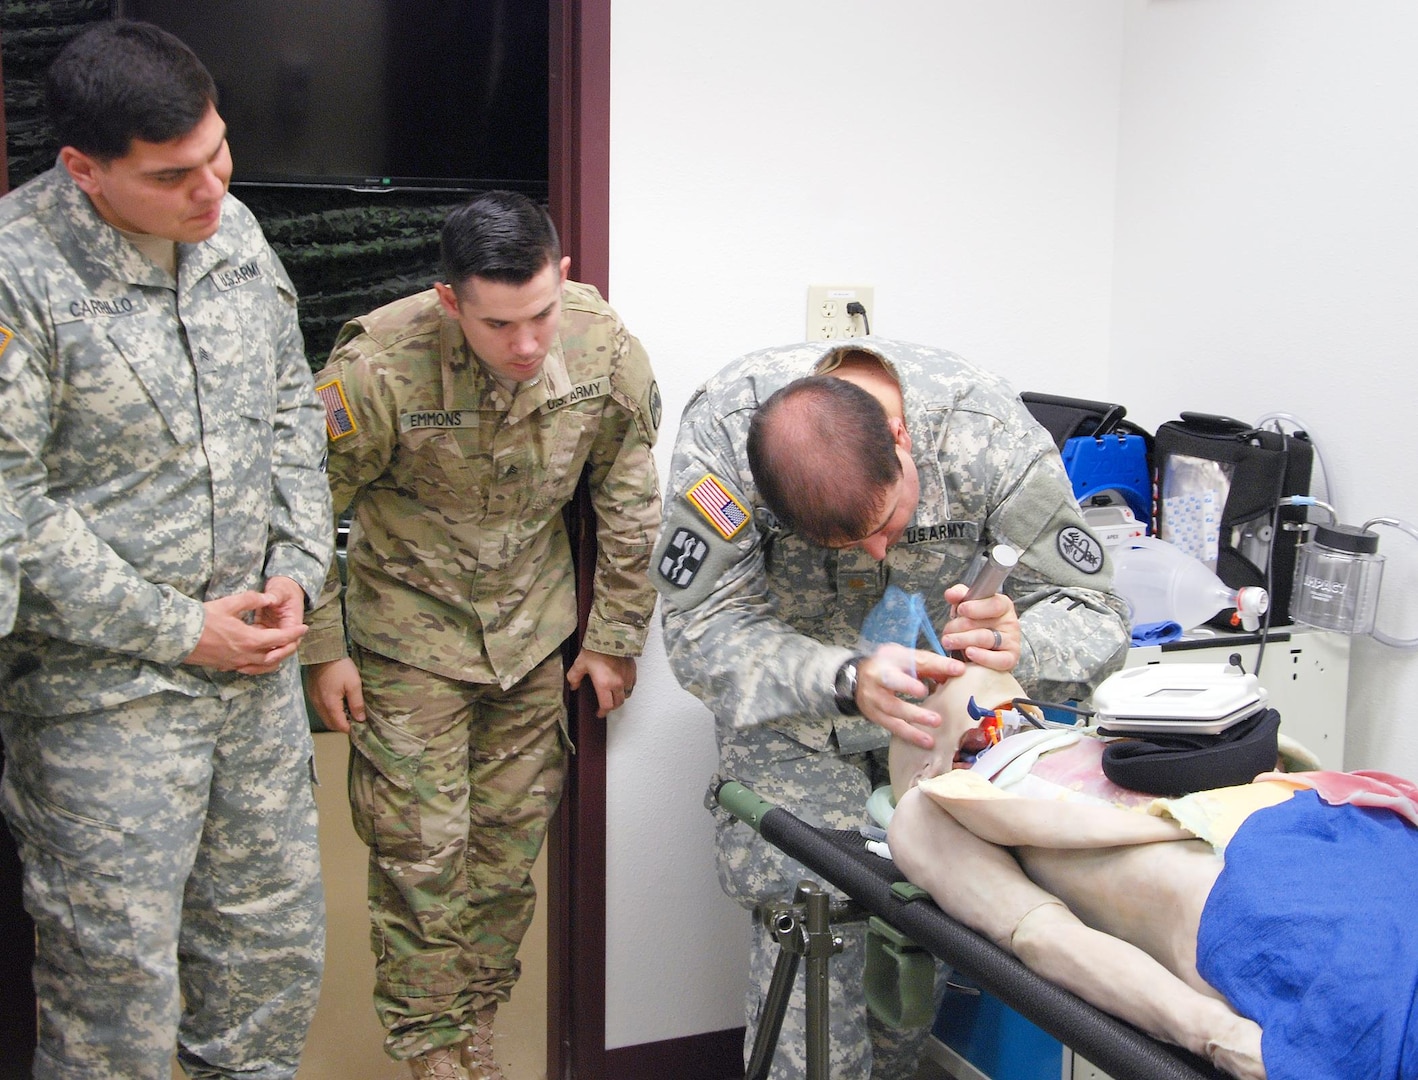 Maj. Steve Carrol (right) teaches airway techniques on synthetic cadavers as students (from left) Sgts. Eric Emmons and Javier Carrillo observe.